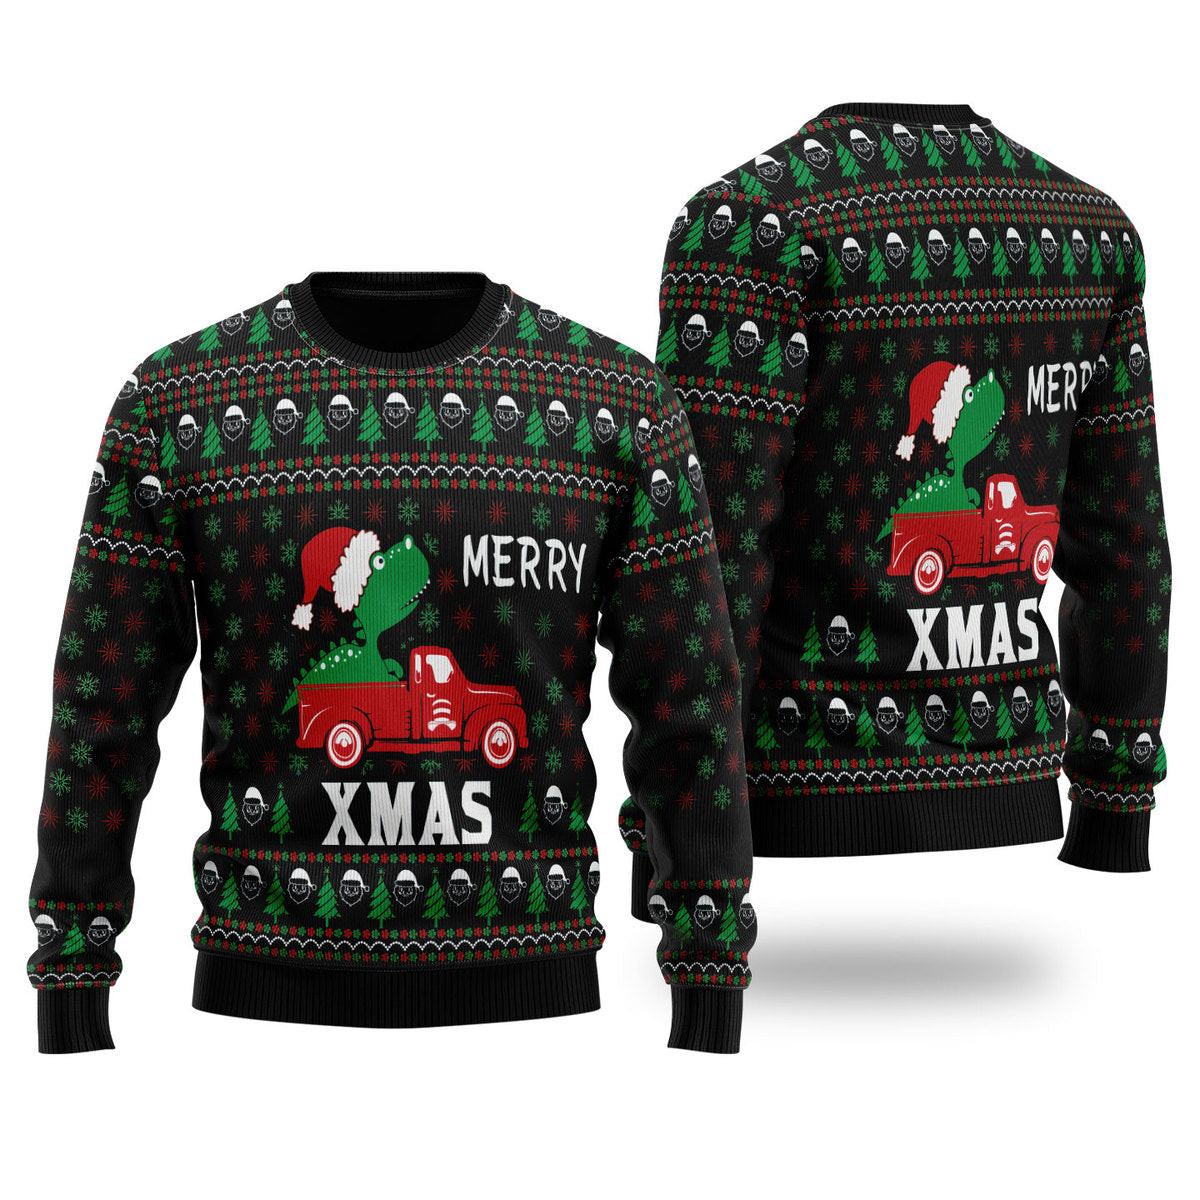 T-rex Merry Xmas Ugly Christmas Sweater Ugly Sweater For Men Women